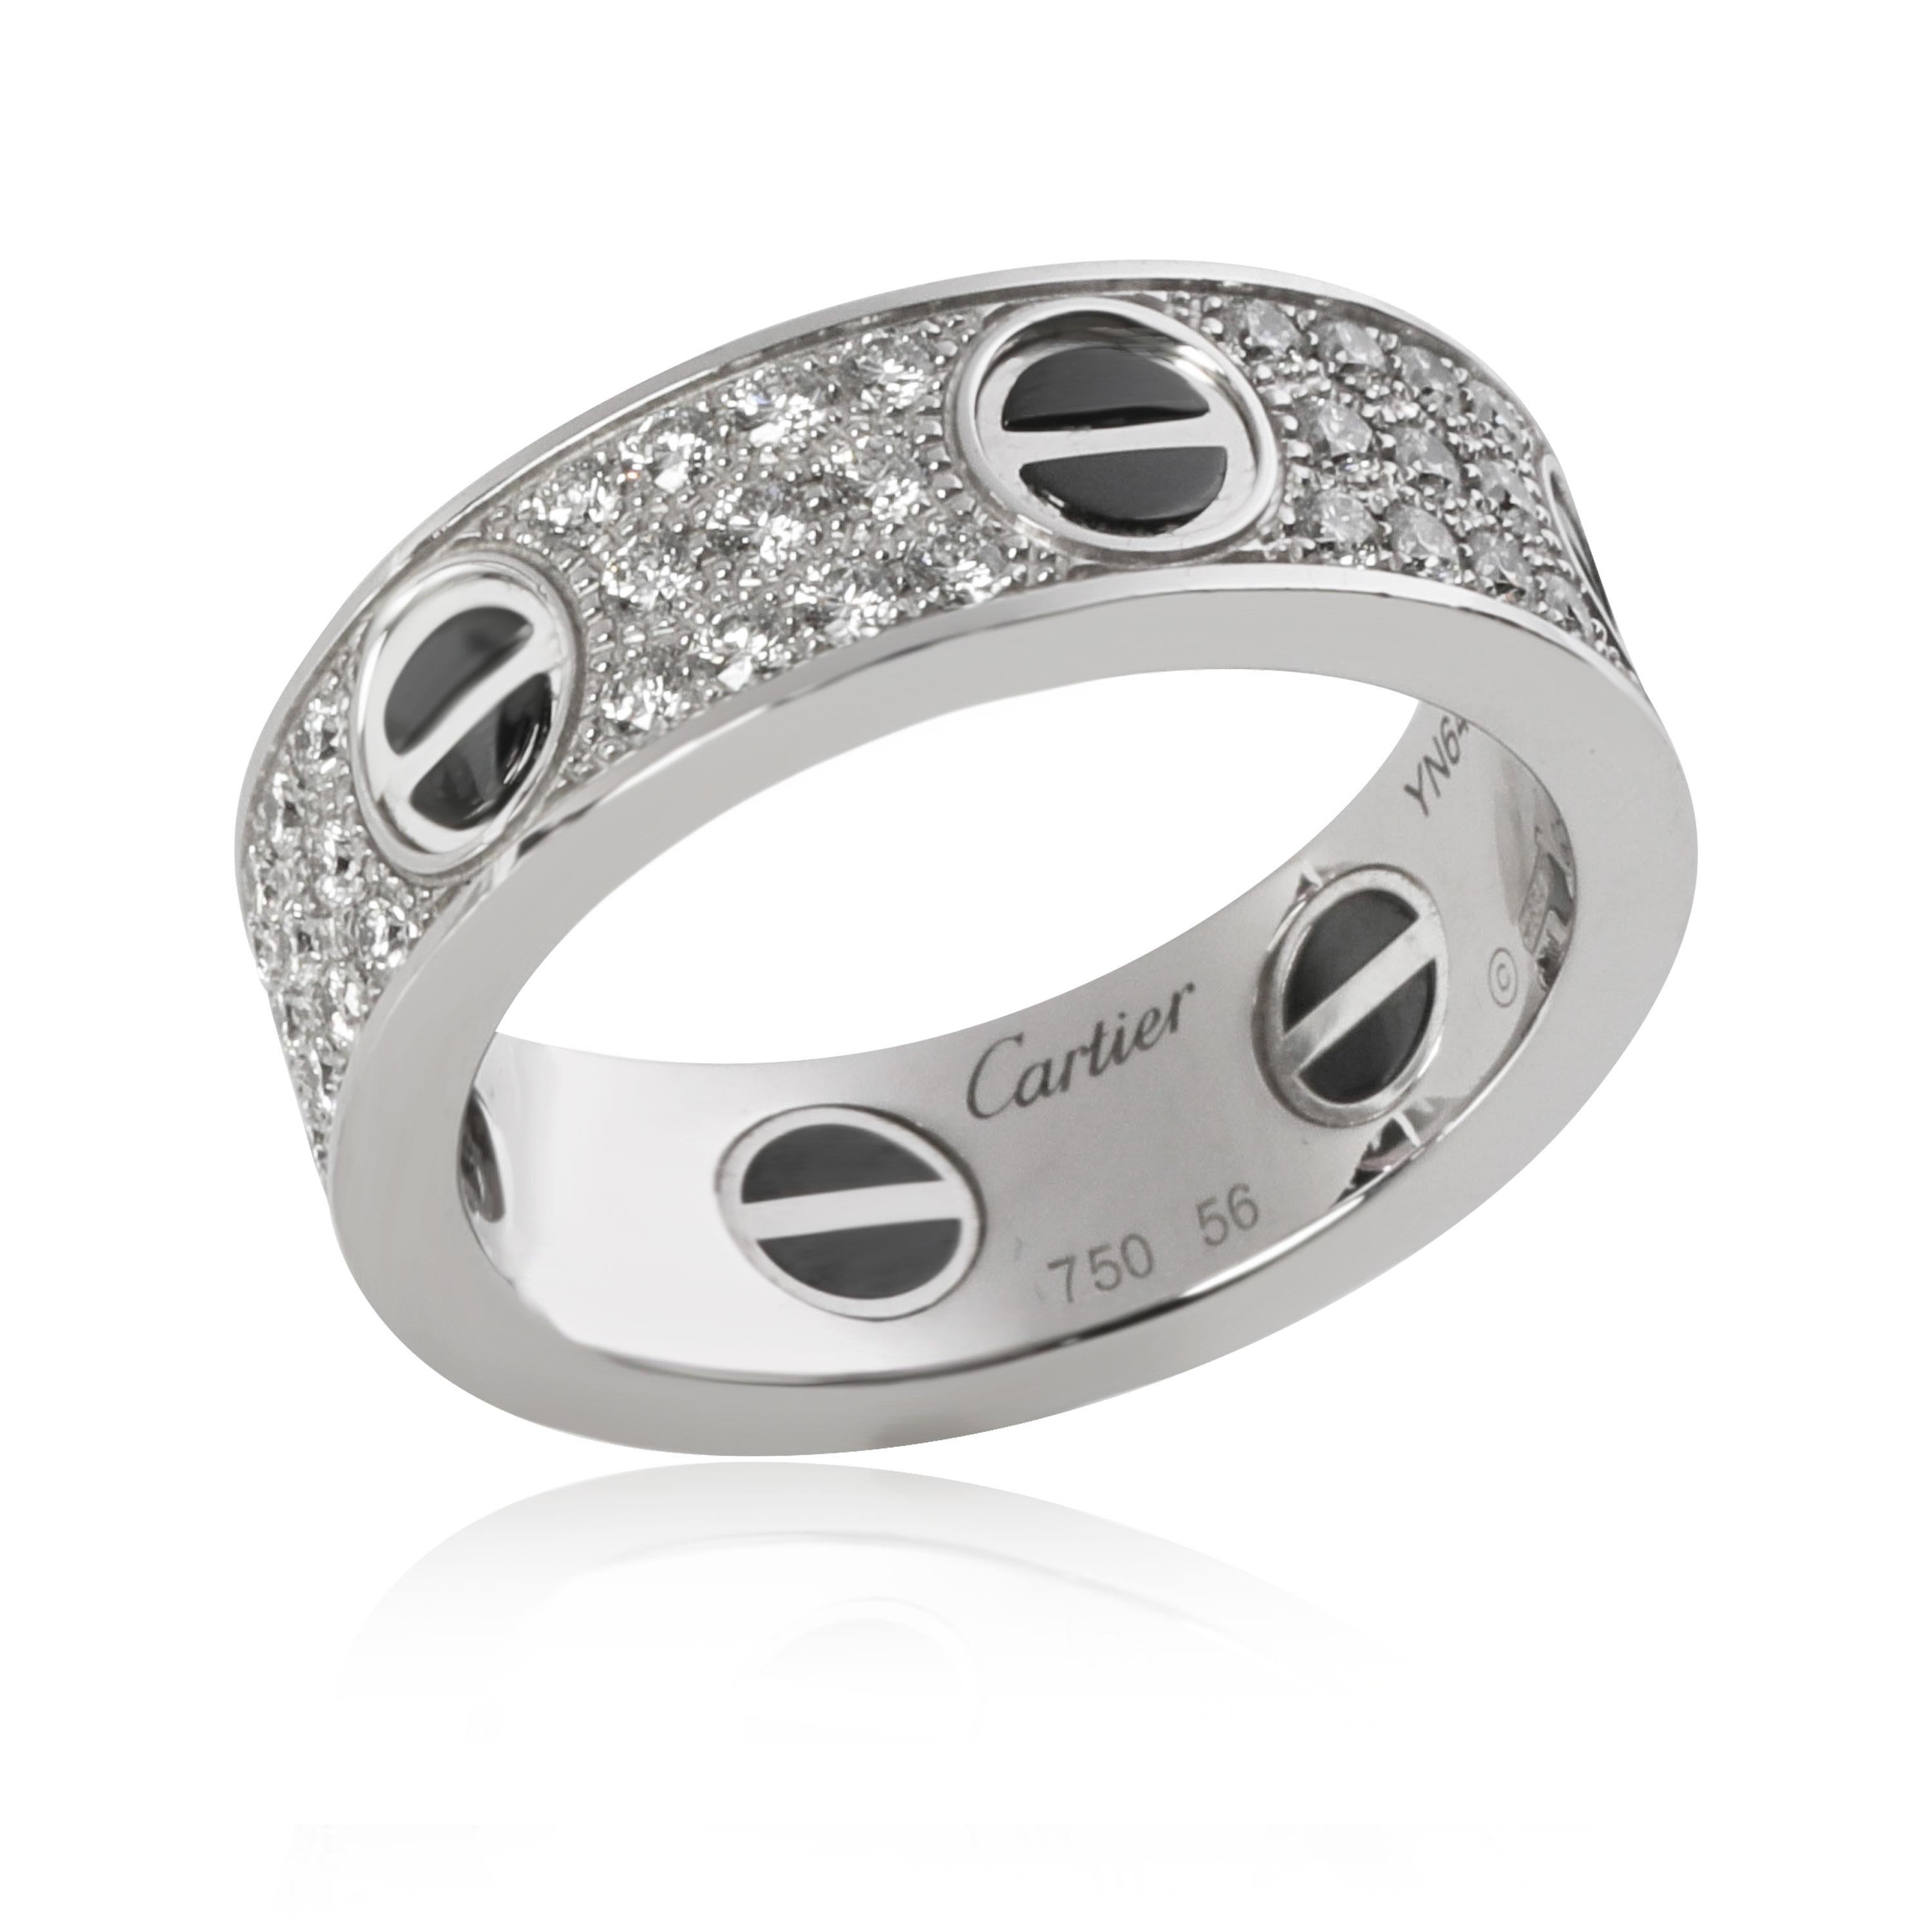 Cartier Love Diamond Ring in 18K White Gold & Black Ceramic 0.74 CTW

PRIMARY DETAILS
SKU: 109896
Listing Title: Cartier Love Diamond Ring in 18K White Gold & Black Ceramic 0.74 CTW
Condition Description: Retails for 10,800 USD. In excellent